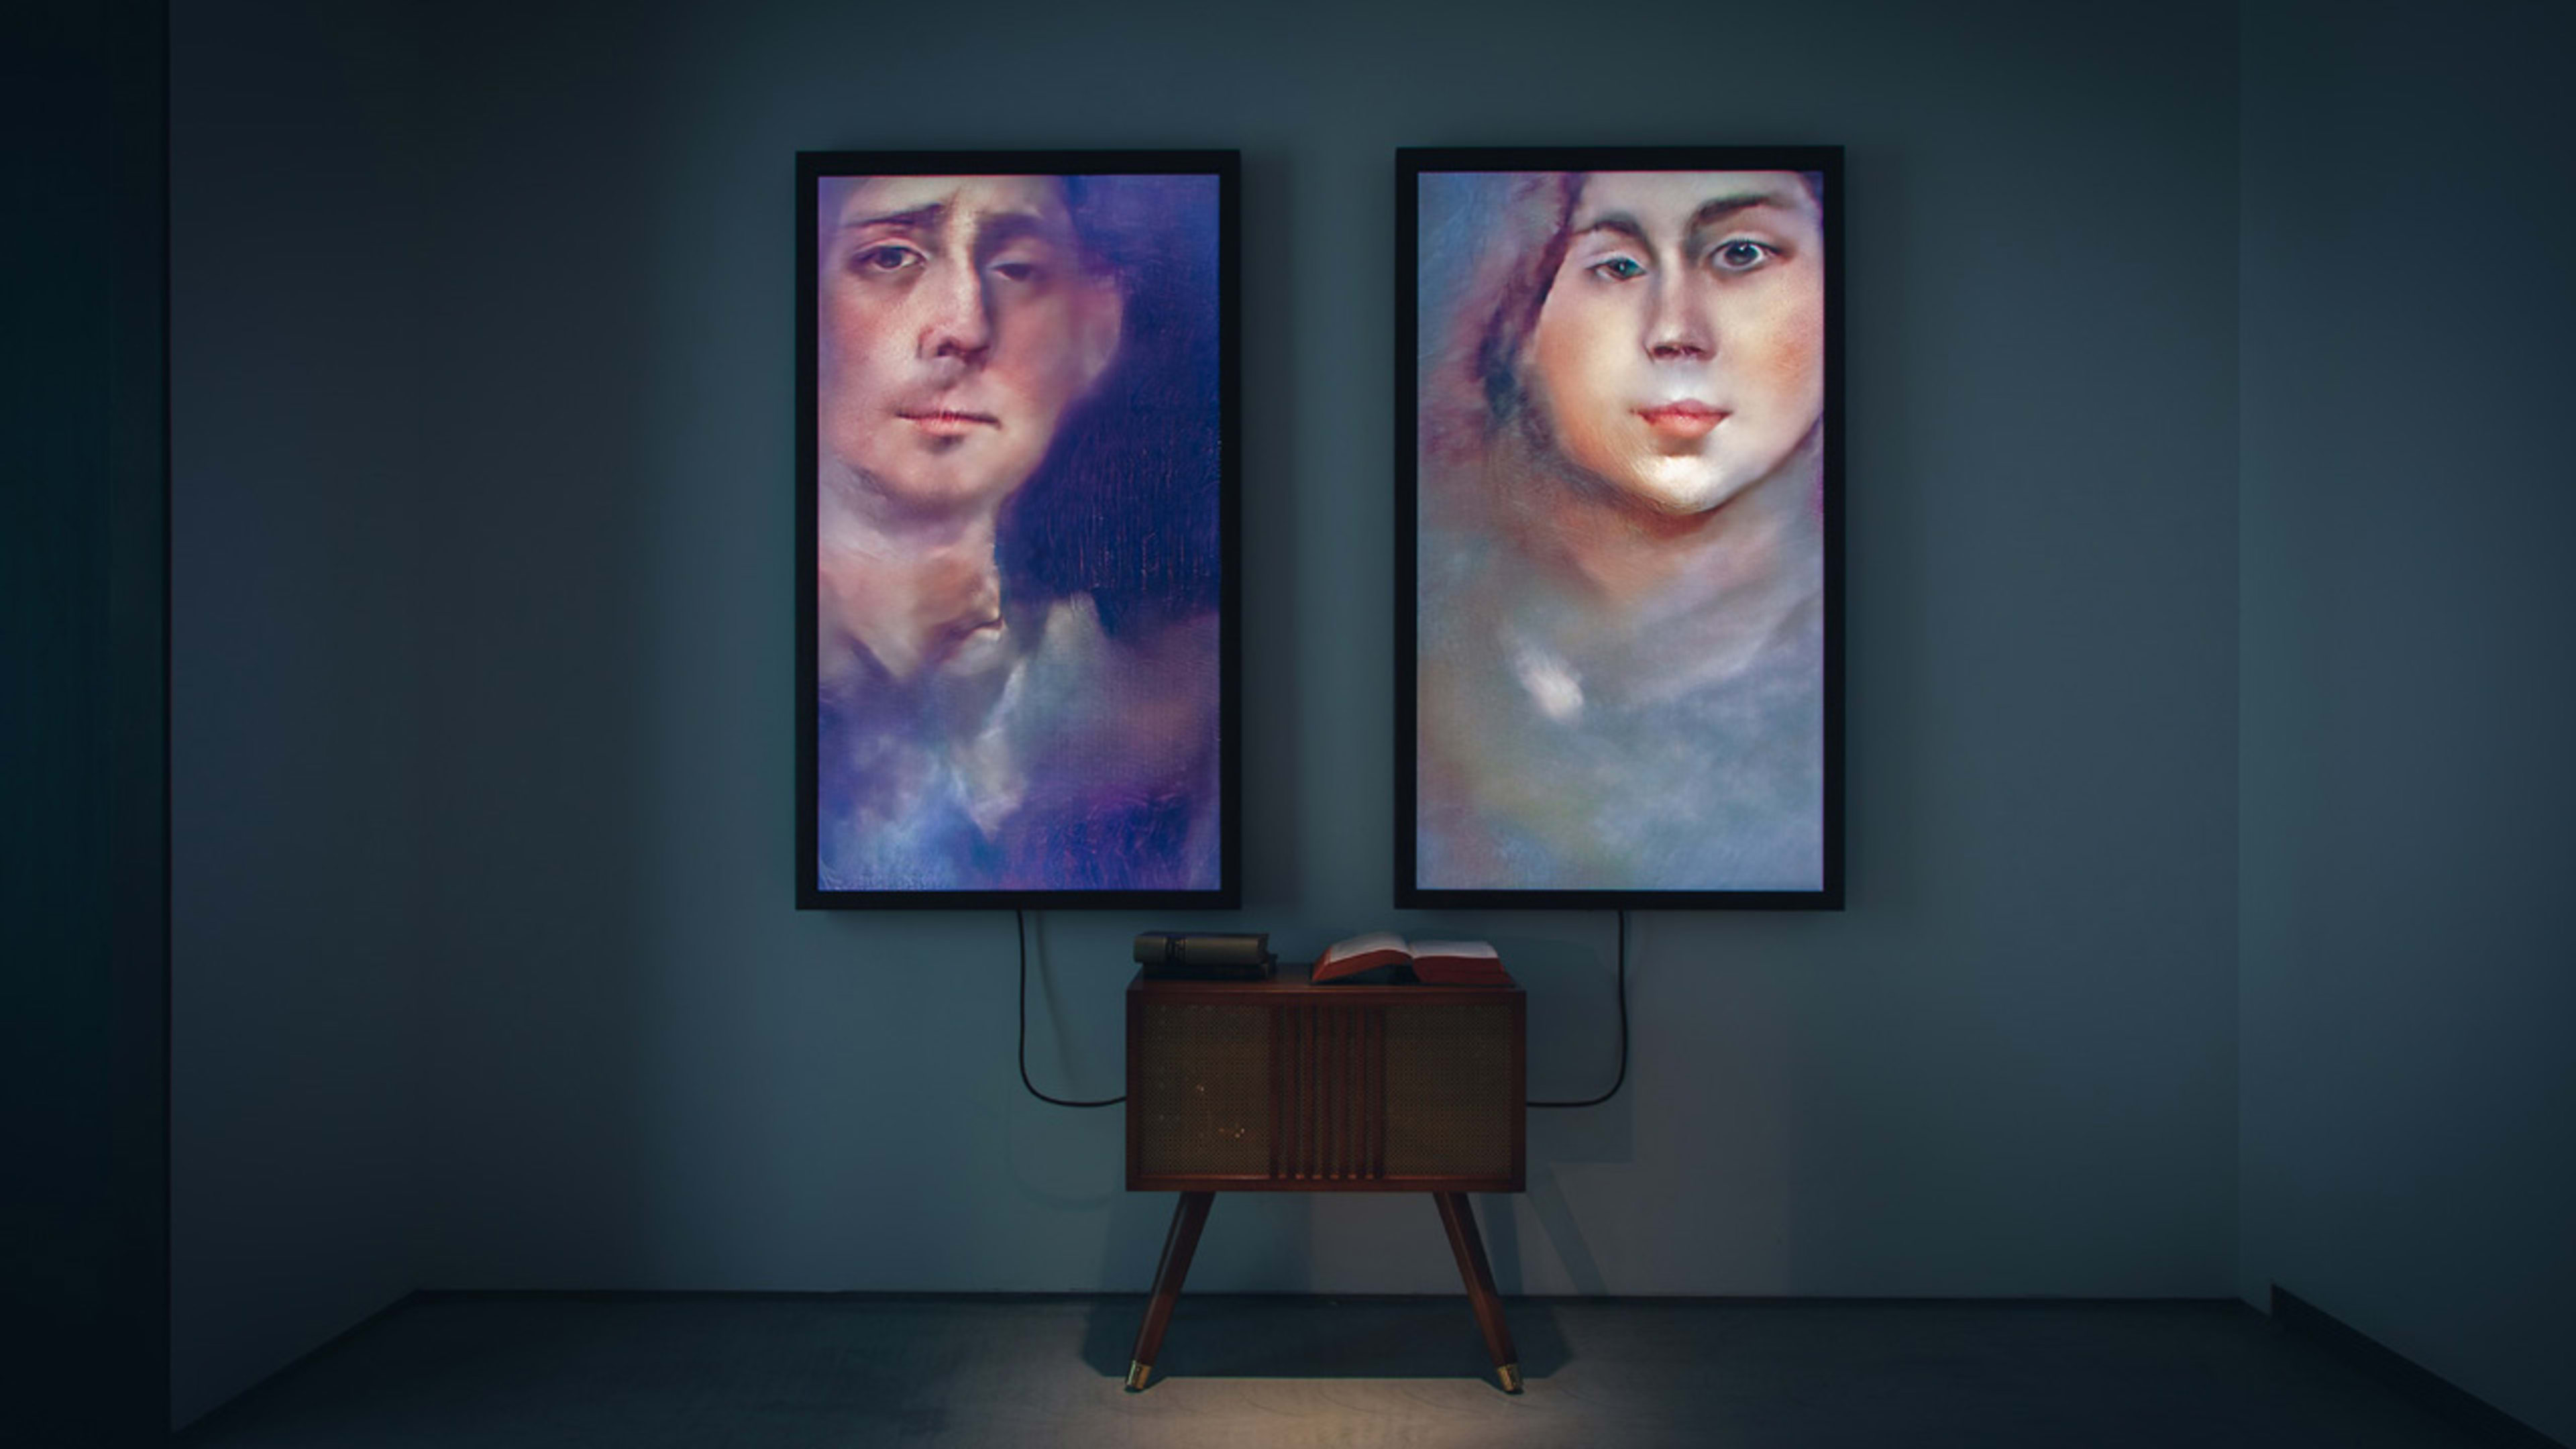 The future of AI art goes up for auction at Sotheby’s for $50,000